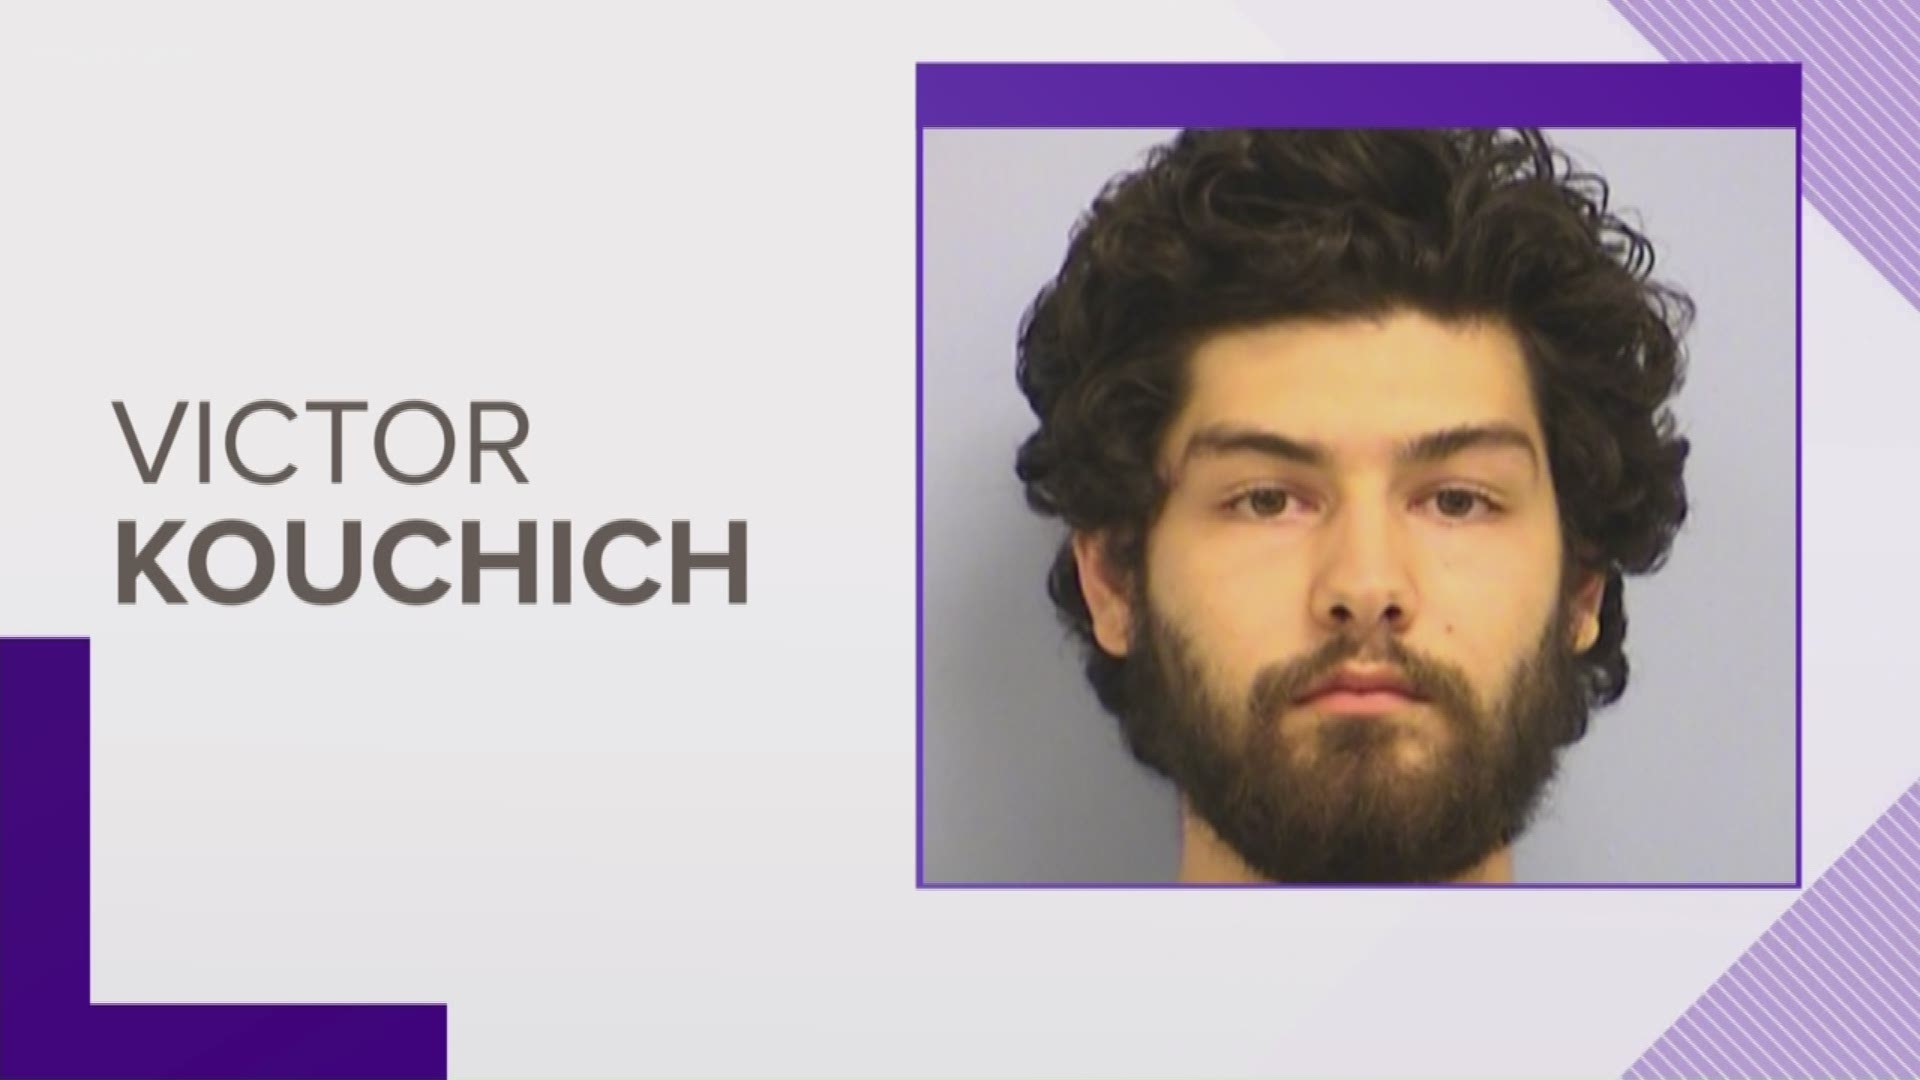 The boyfriend of the alleged victim is facing felony kidnapping charges.